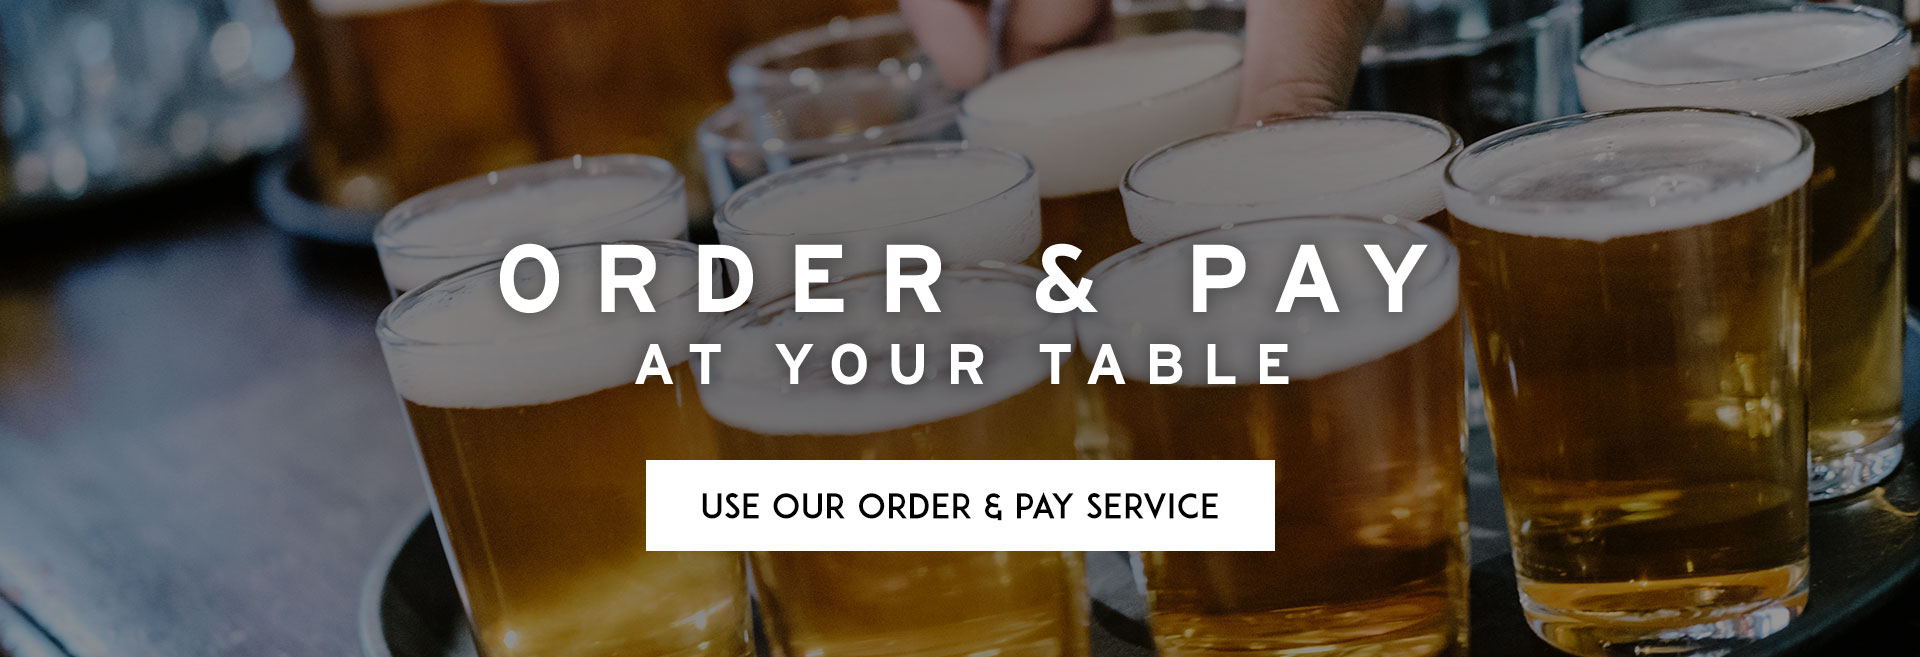 Order at table at The Crown & Sceptre hero